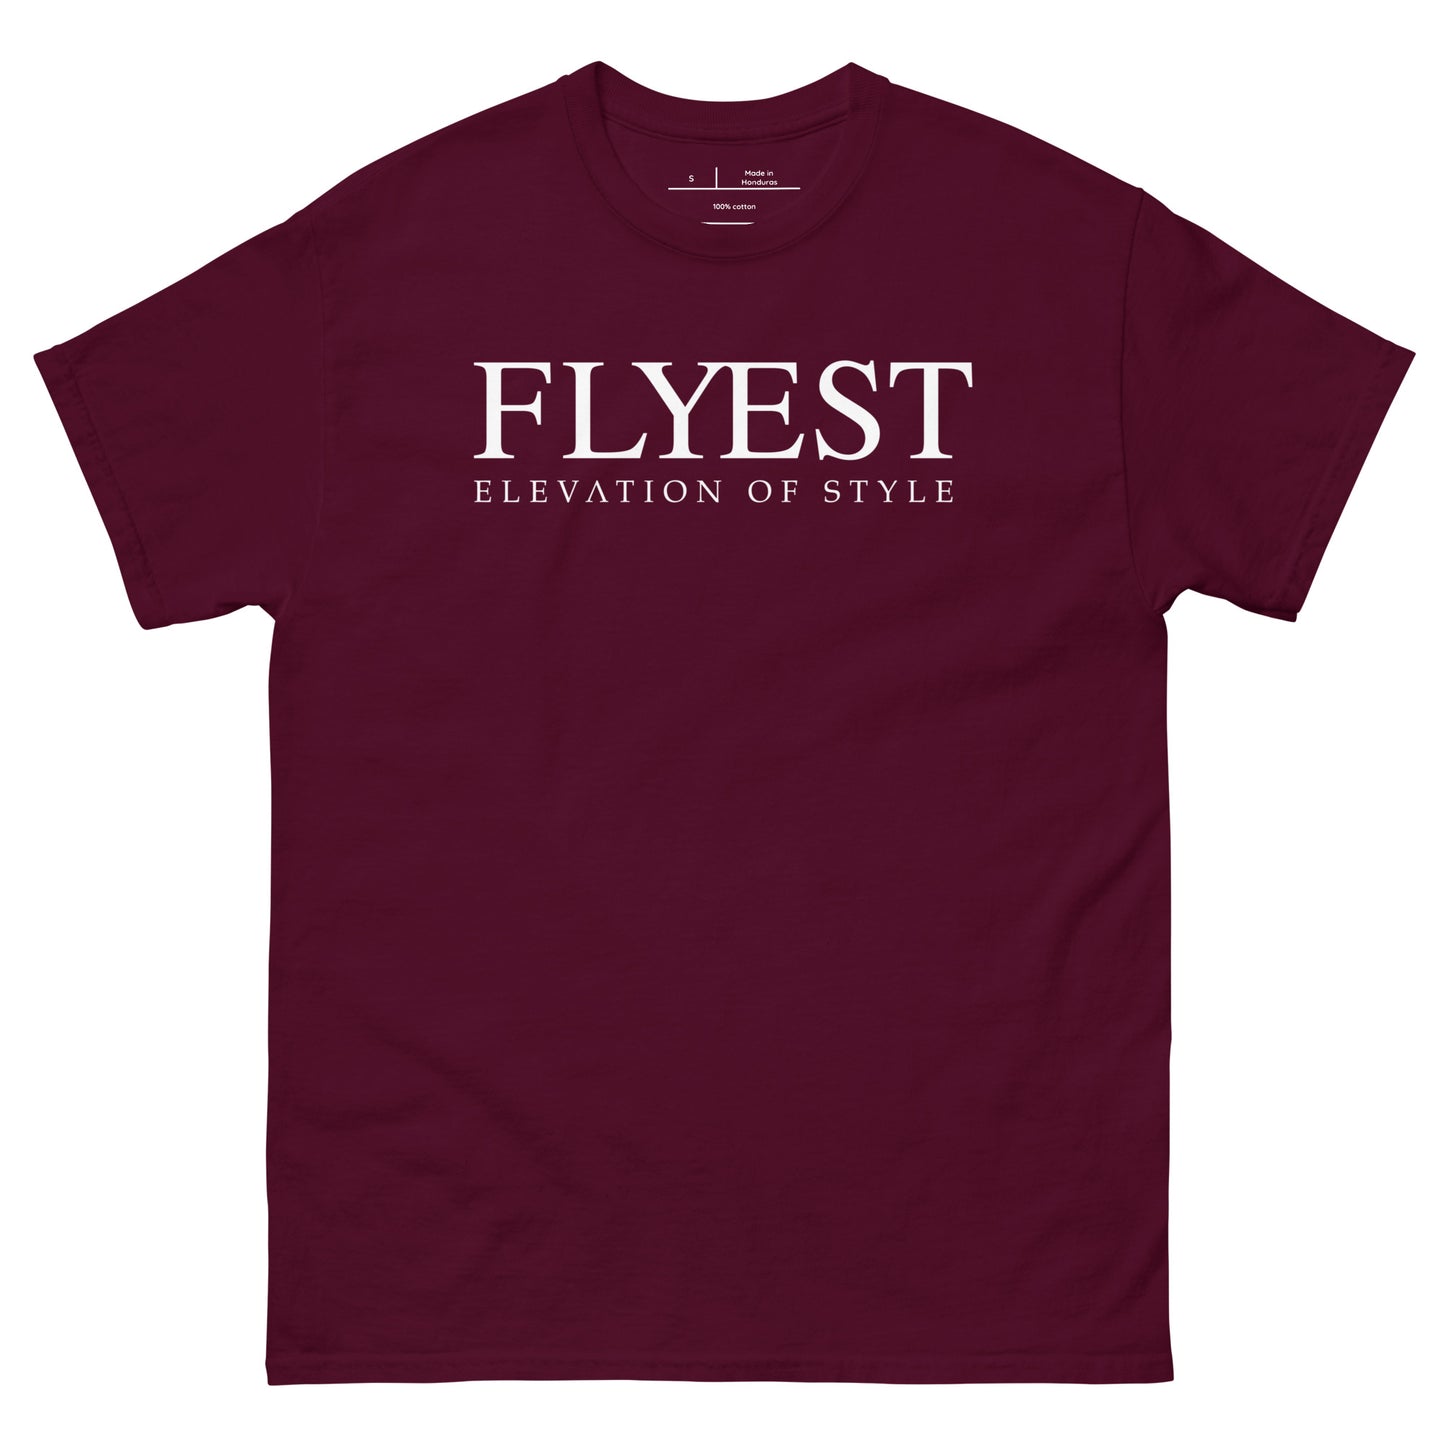 Flyest Elevation of Style tee